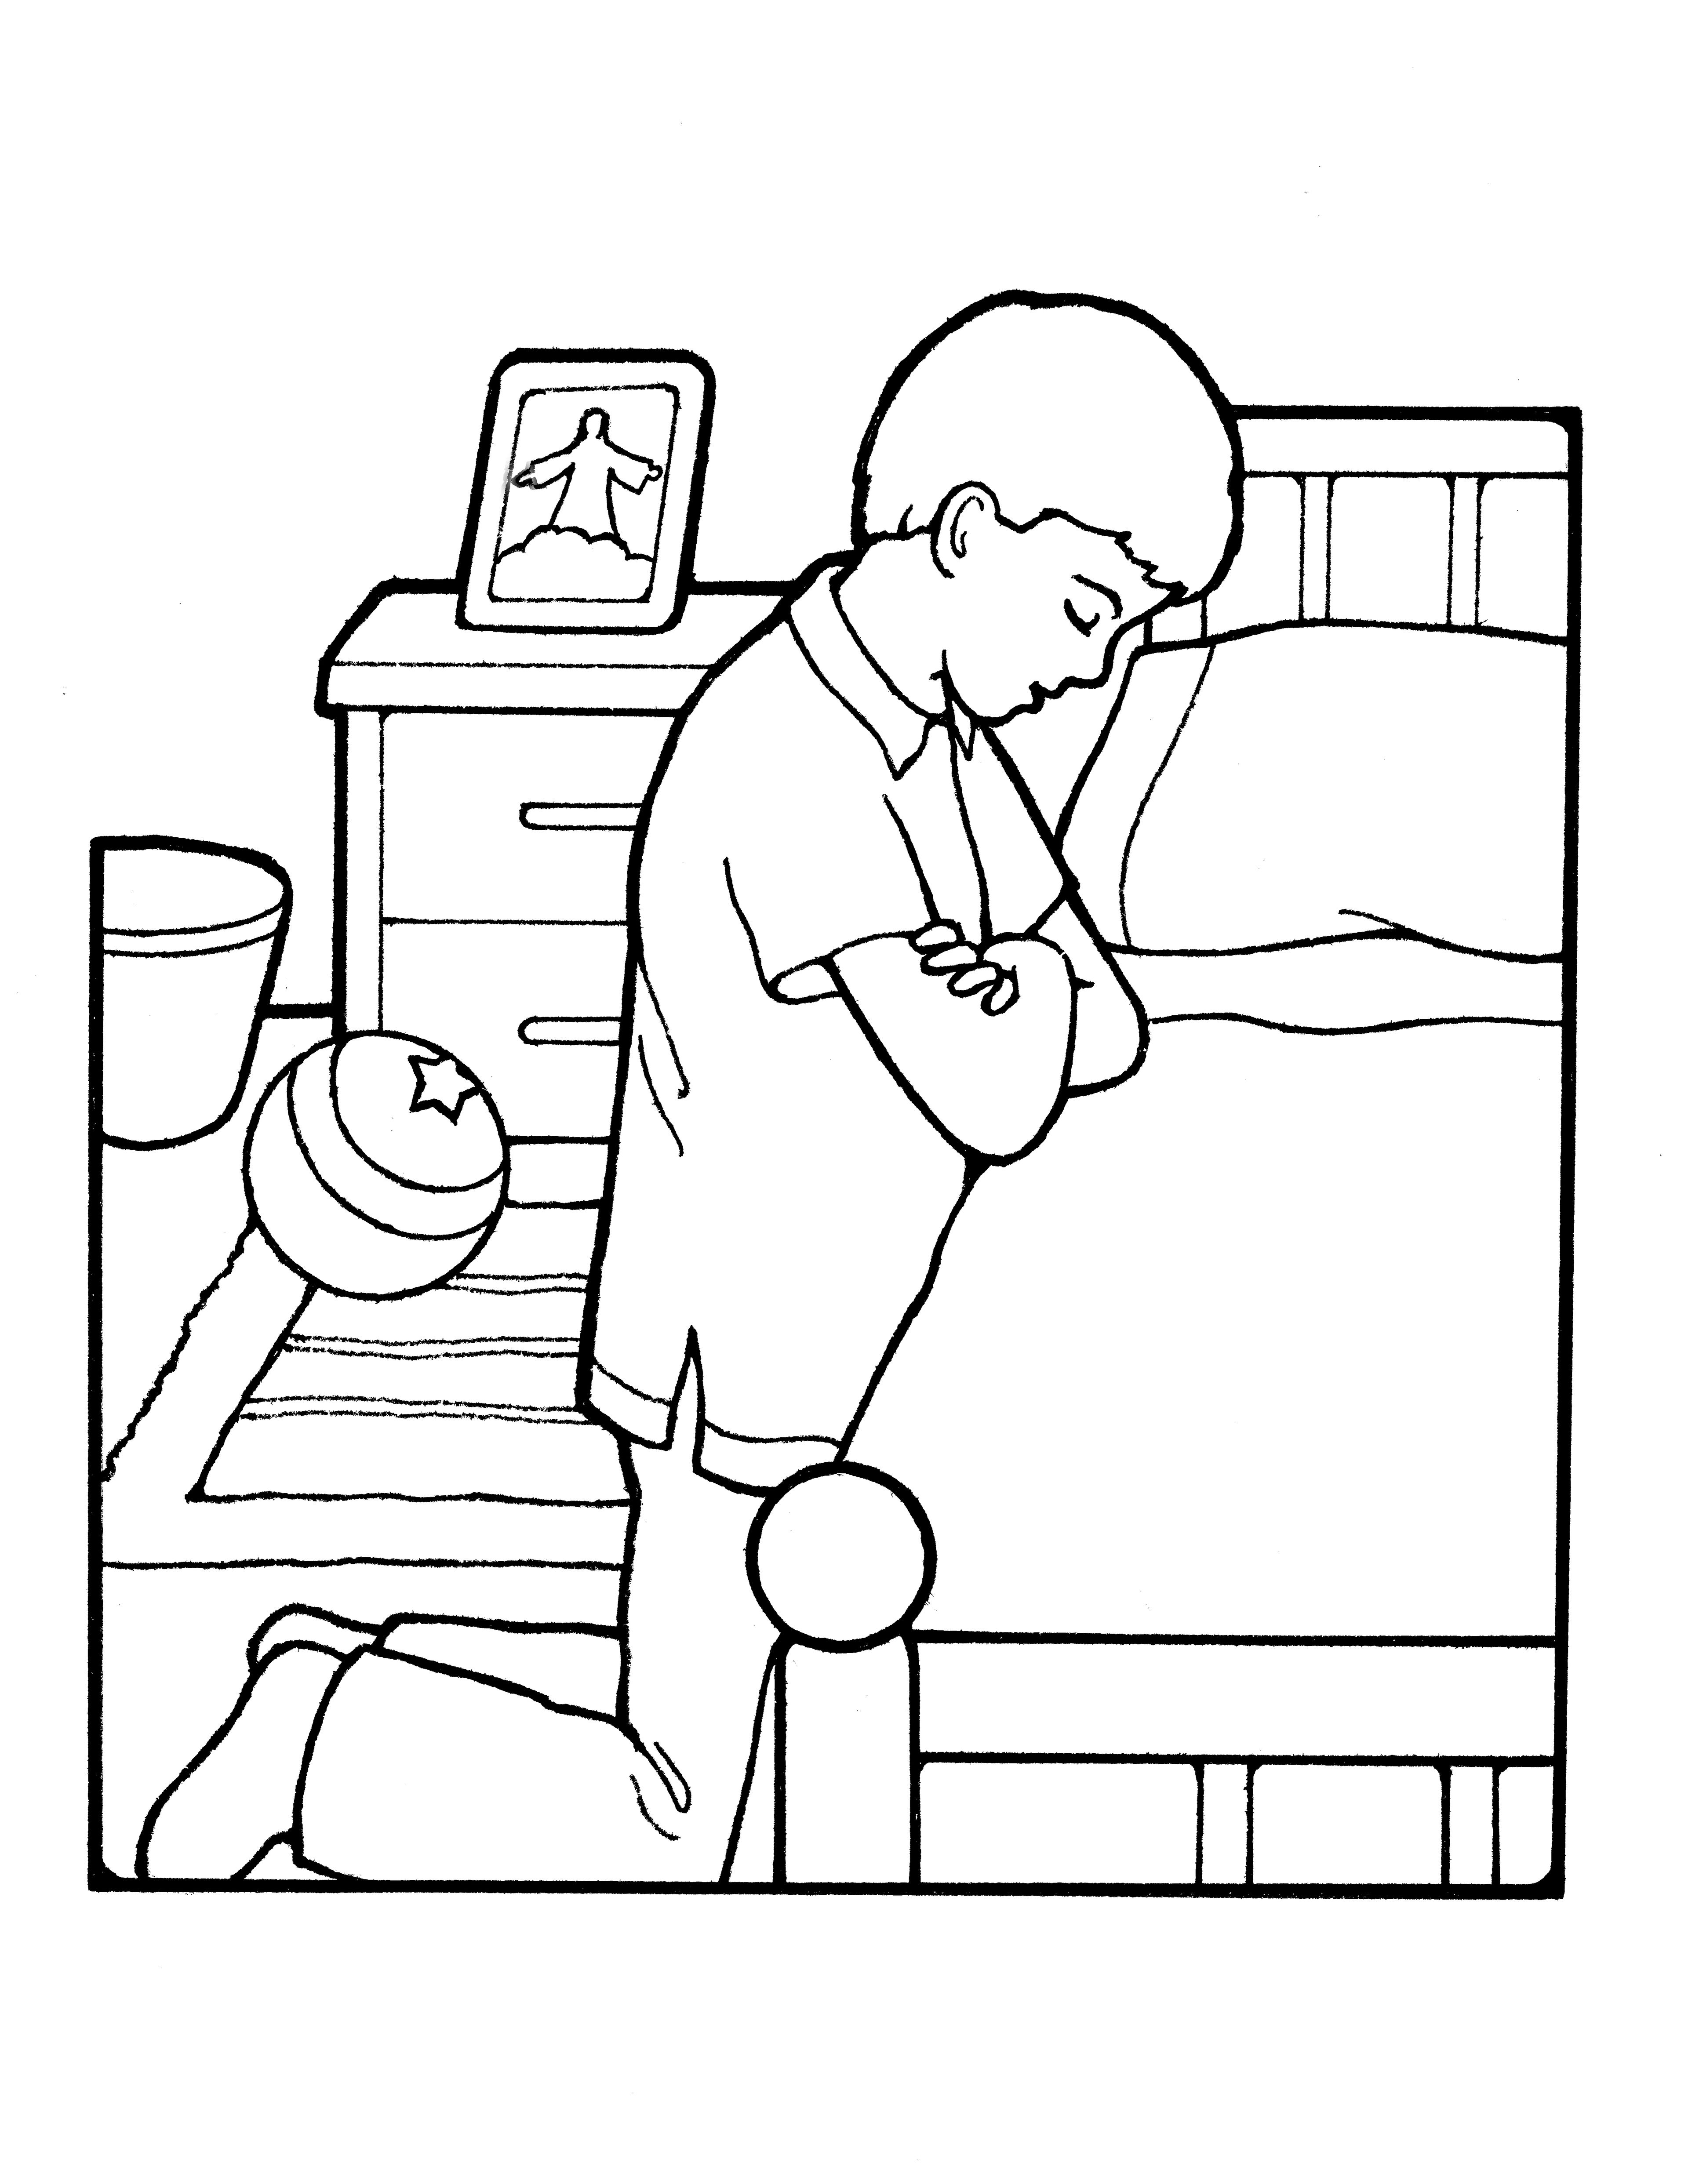 A line drawing of a boy praying near his bedside.